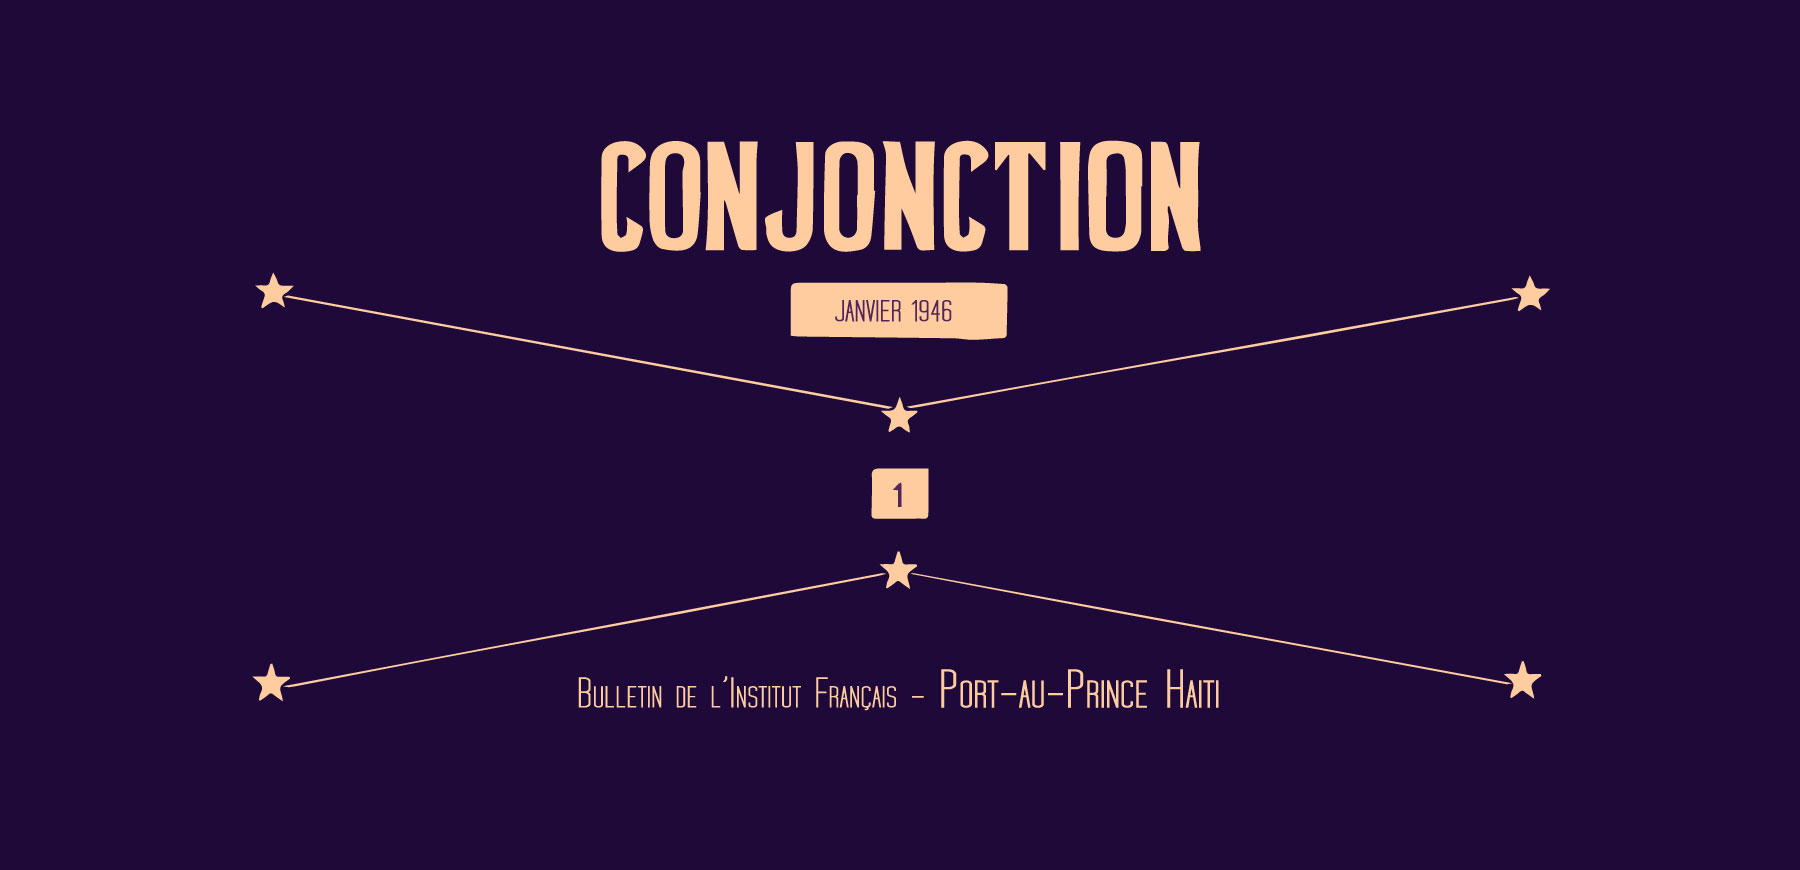 Conjonction